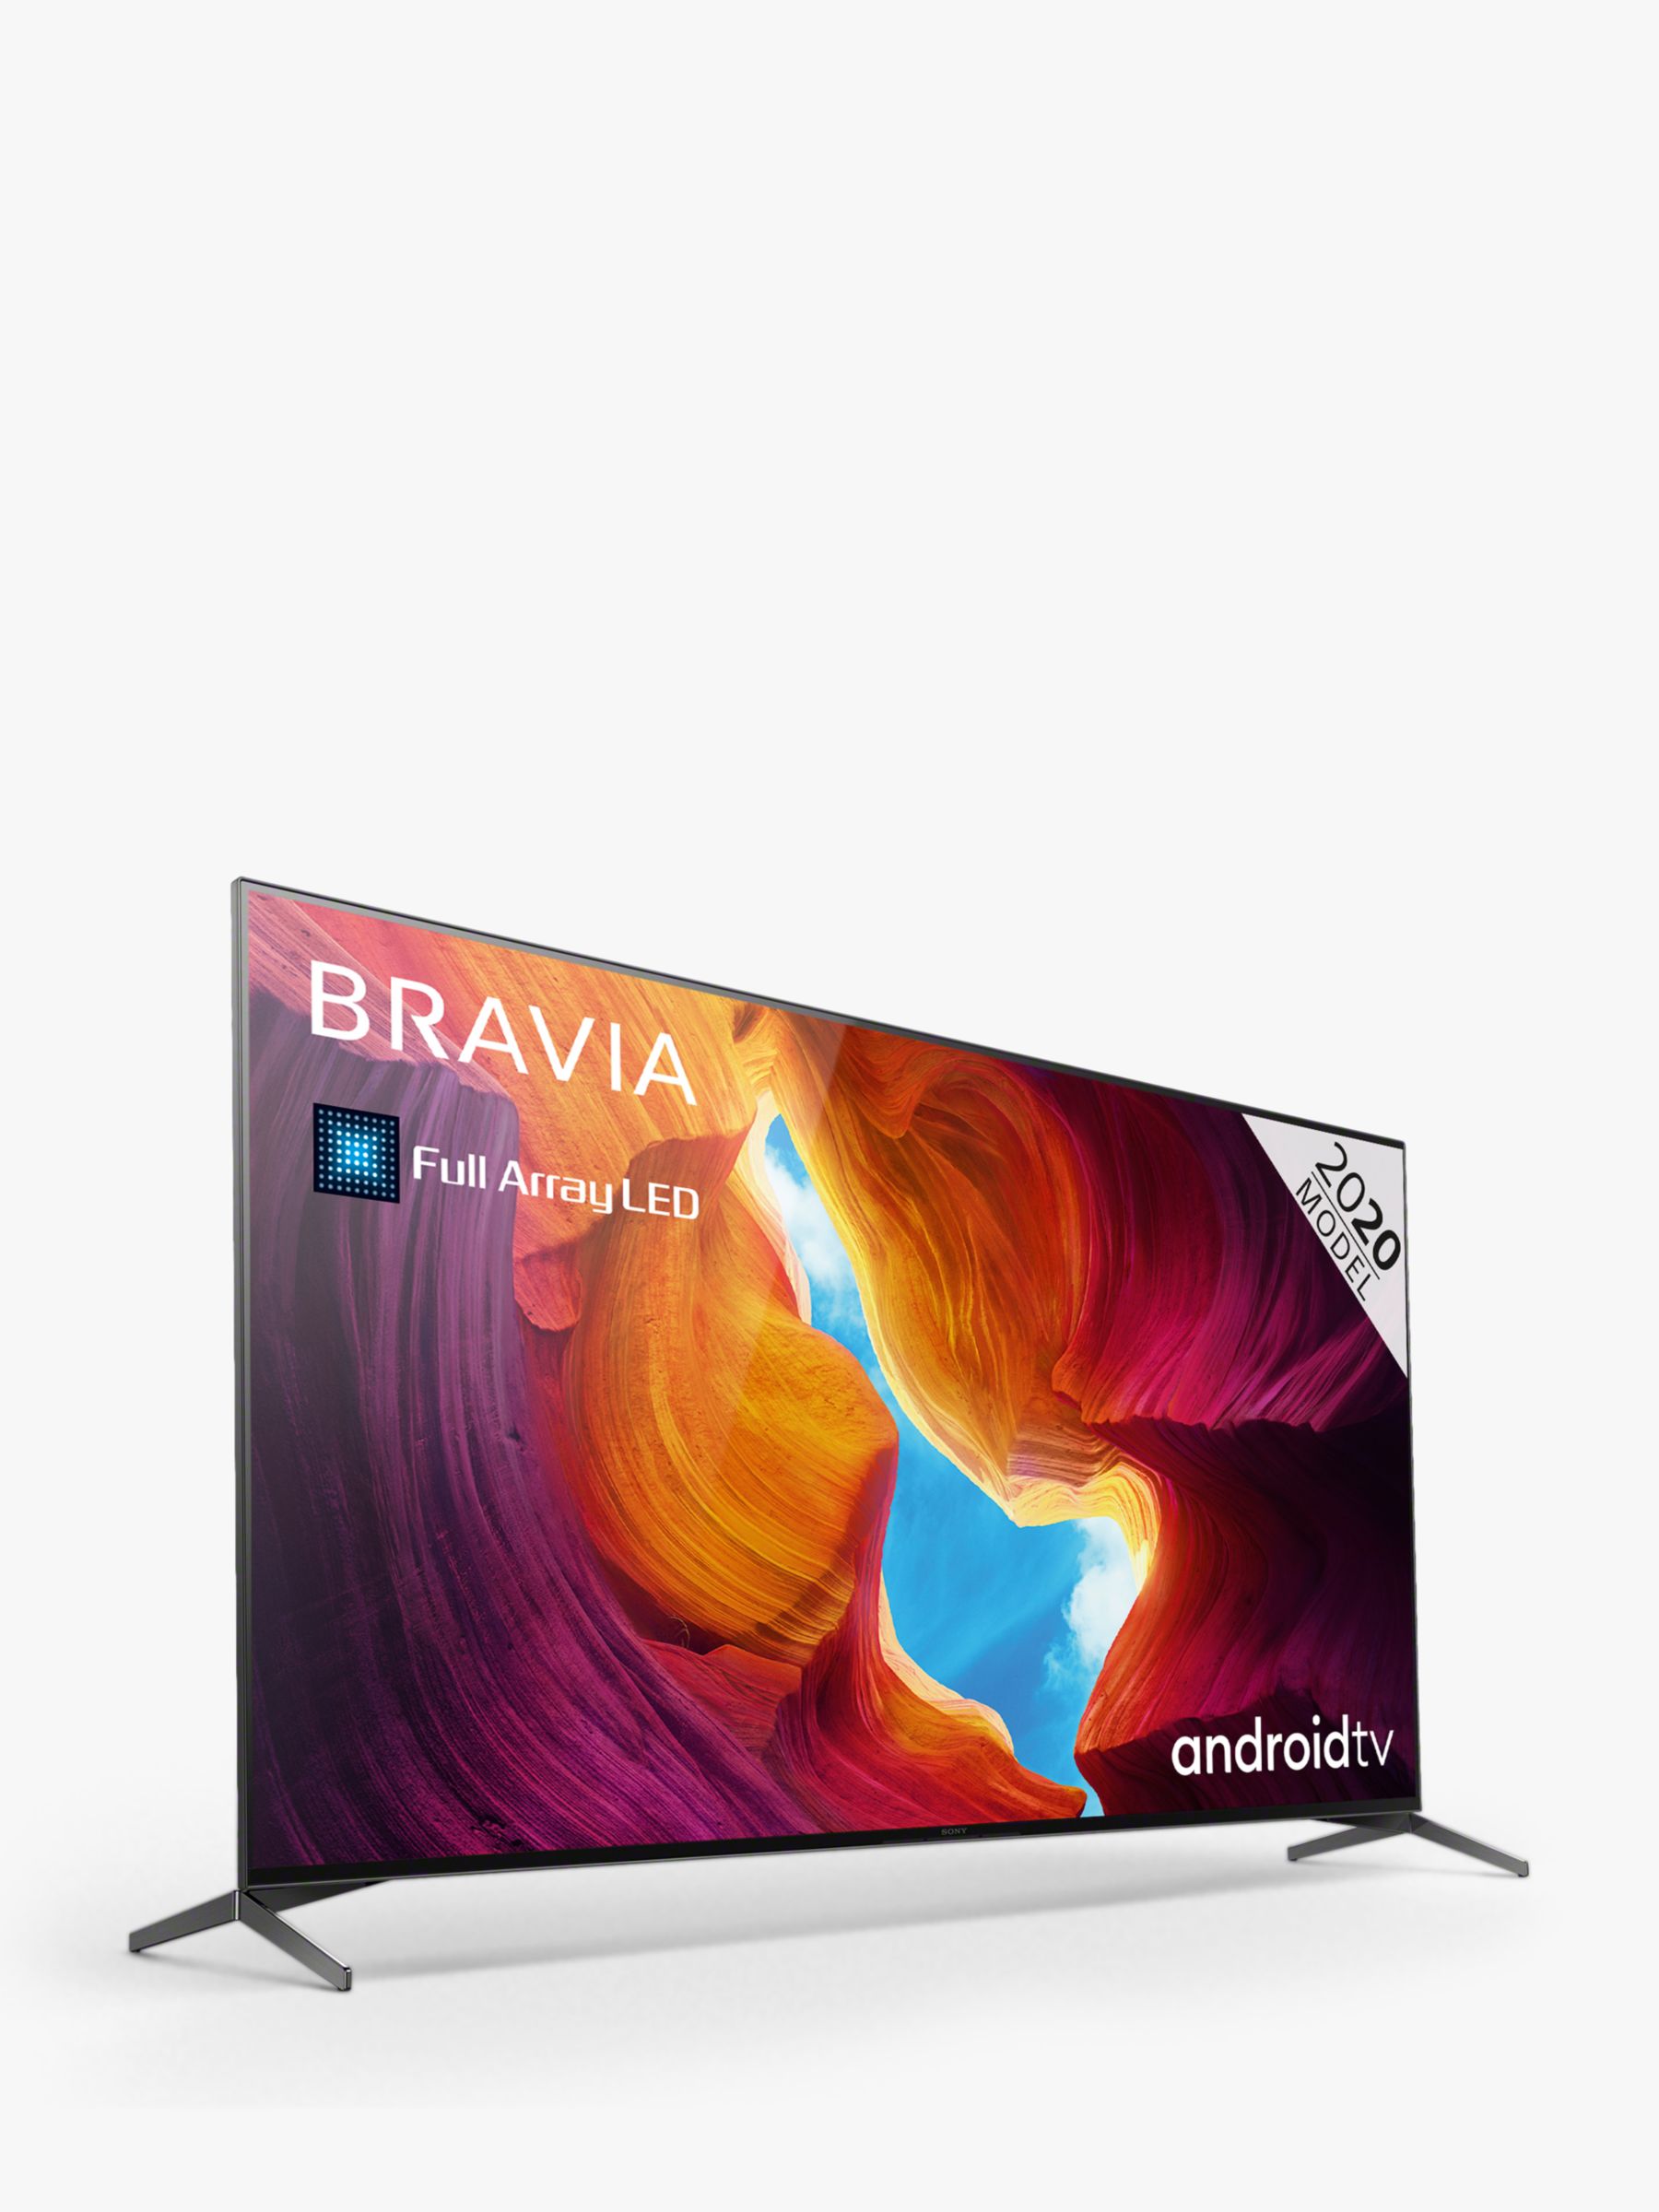 Sony Bravia Kd75xh9505 2020 Led Hdr 4k Ultra Hd Smart Android Tv 75 Inch With Freeview Hd 5492